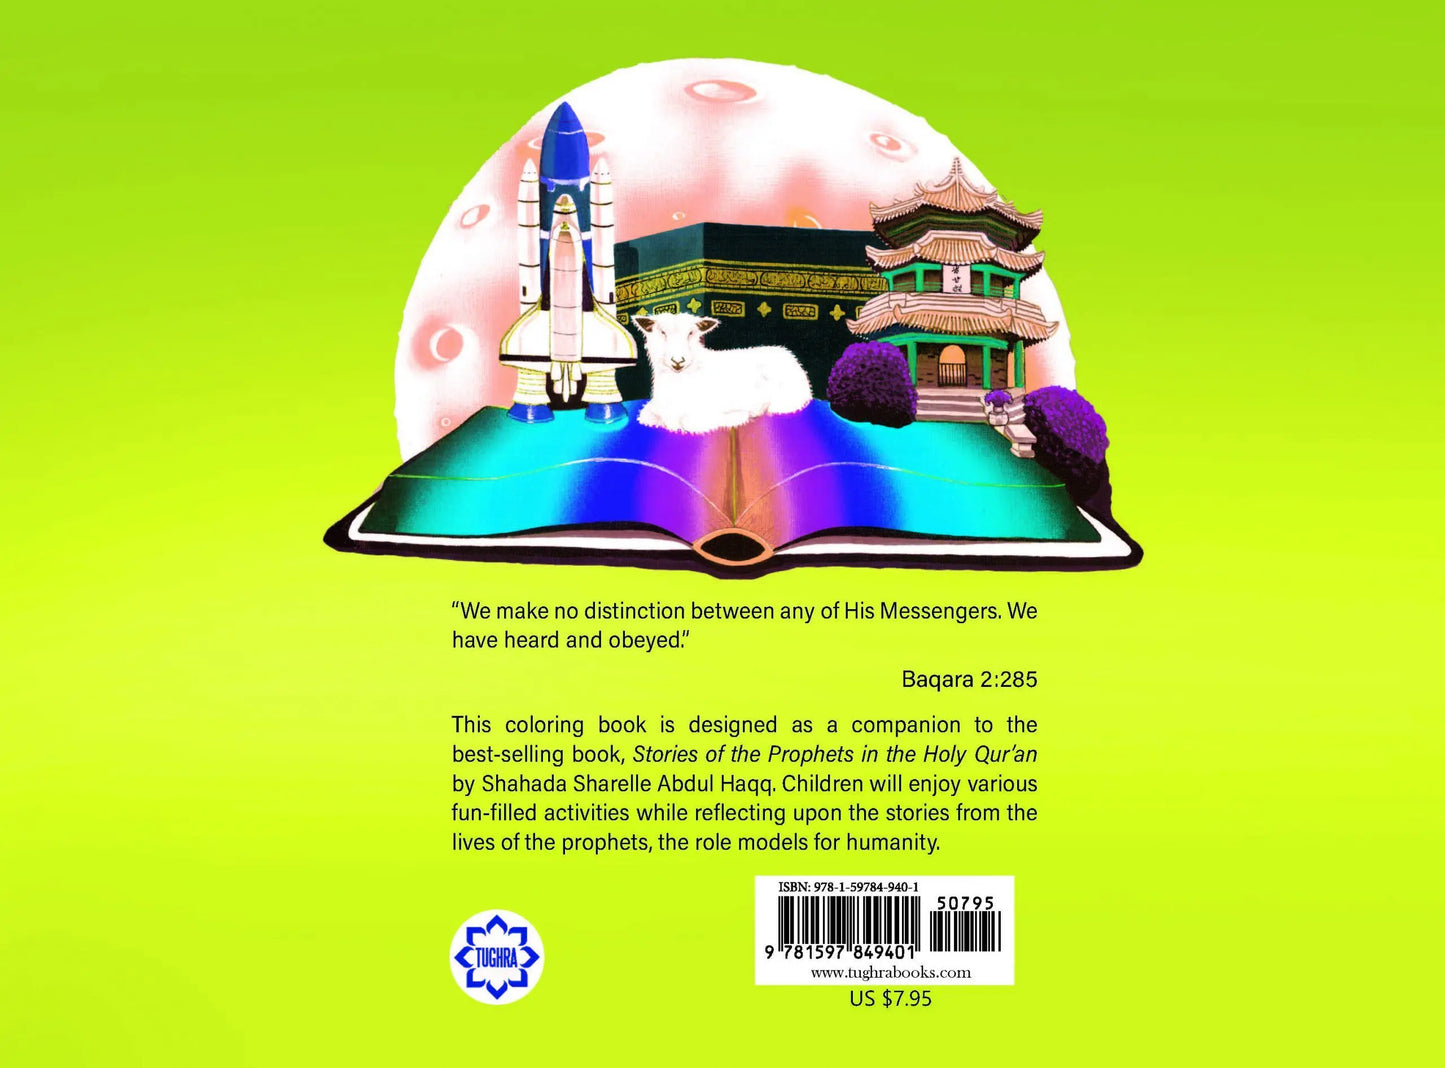 Coloring Book For Stories of The Prophets In The Holy Qur'an